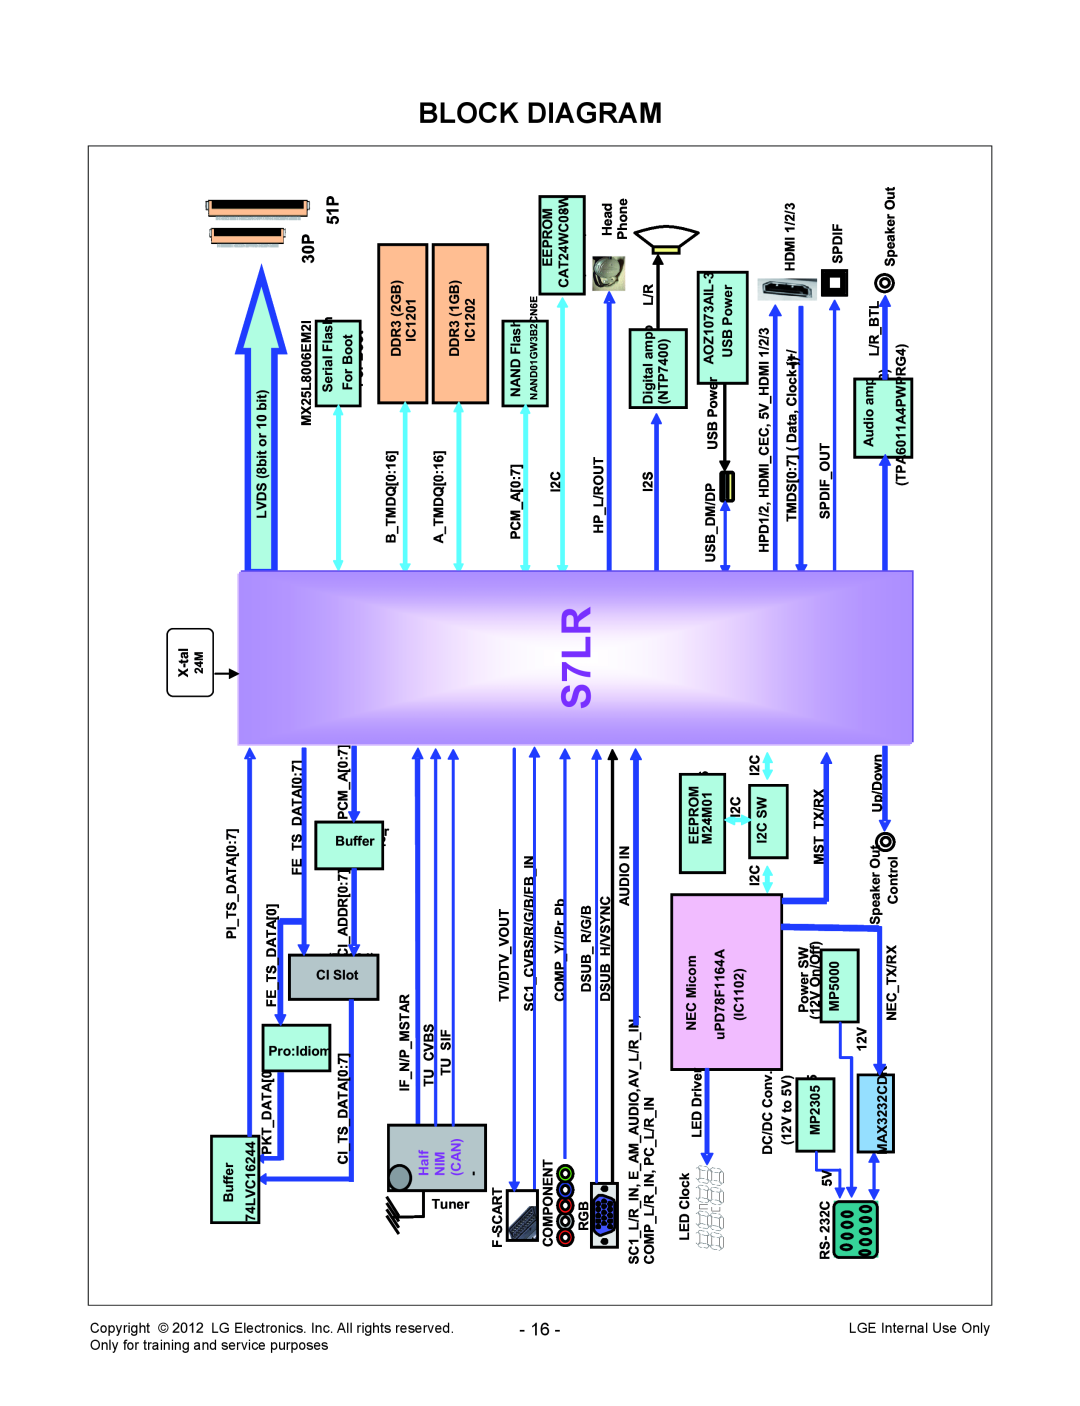 LG Electronics 32LT380C/380H-ZA Block Diagram, S7LR, Copyright, All rights reserved, LGE Internal Use Only, Half 